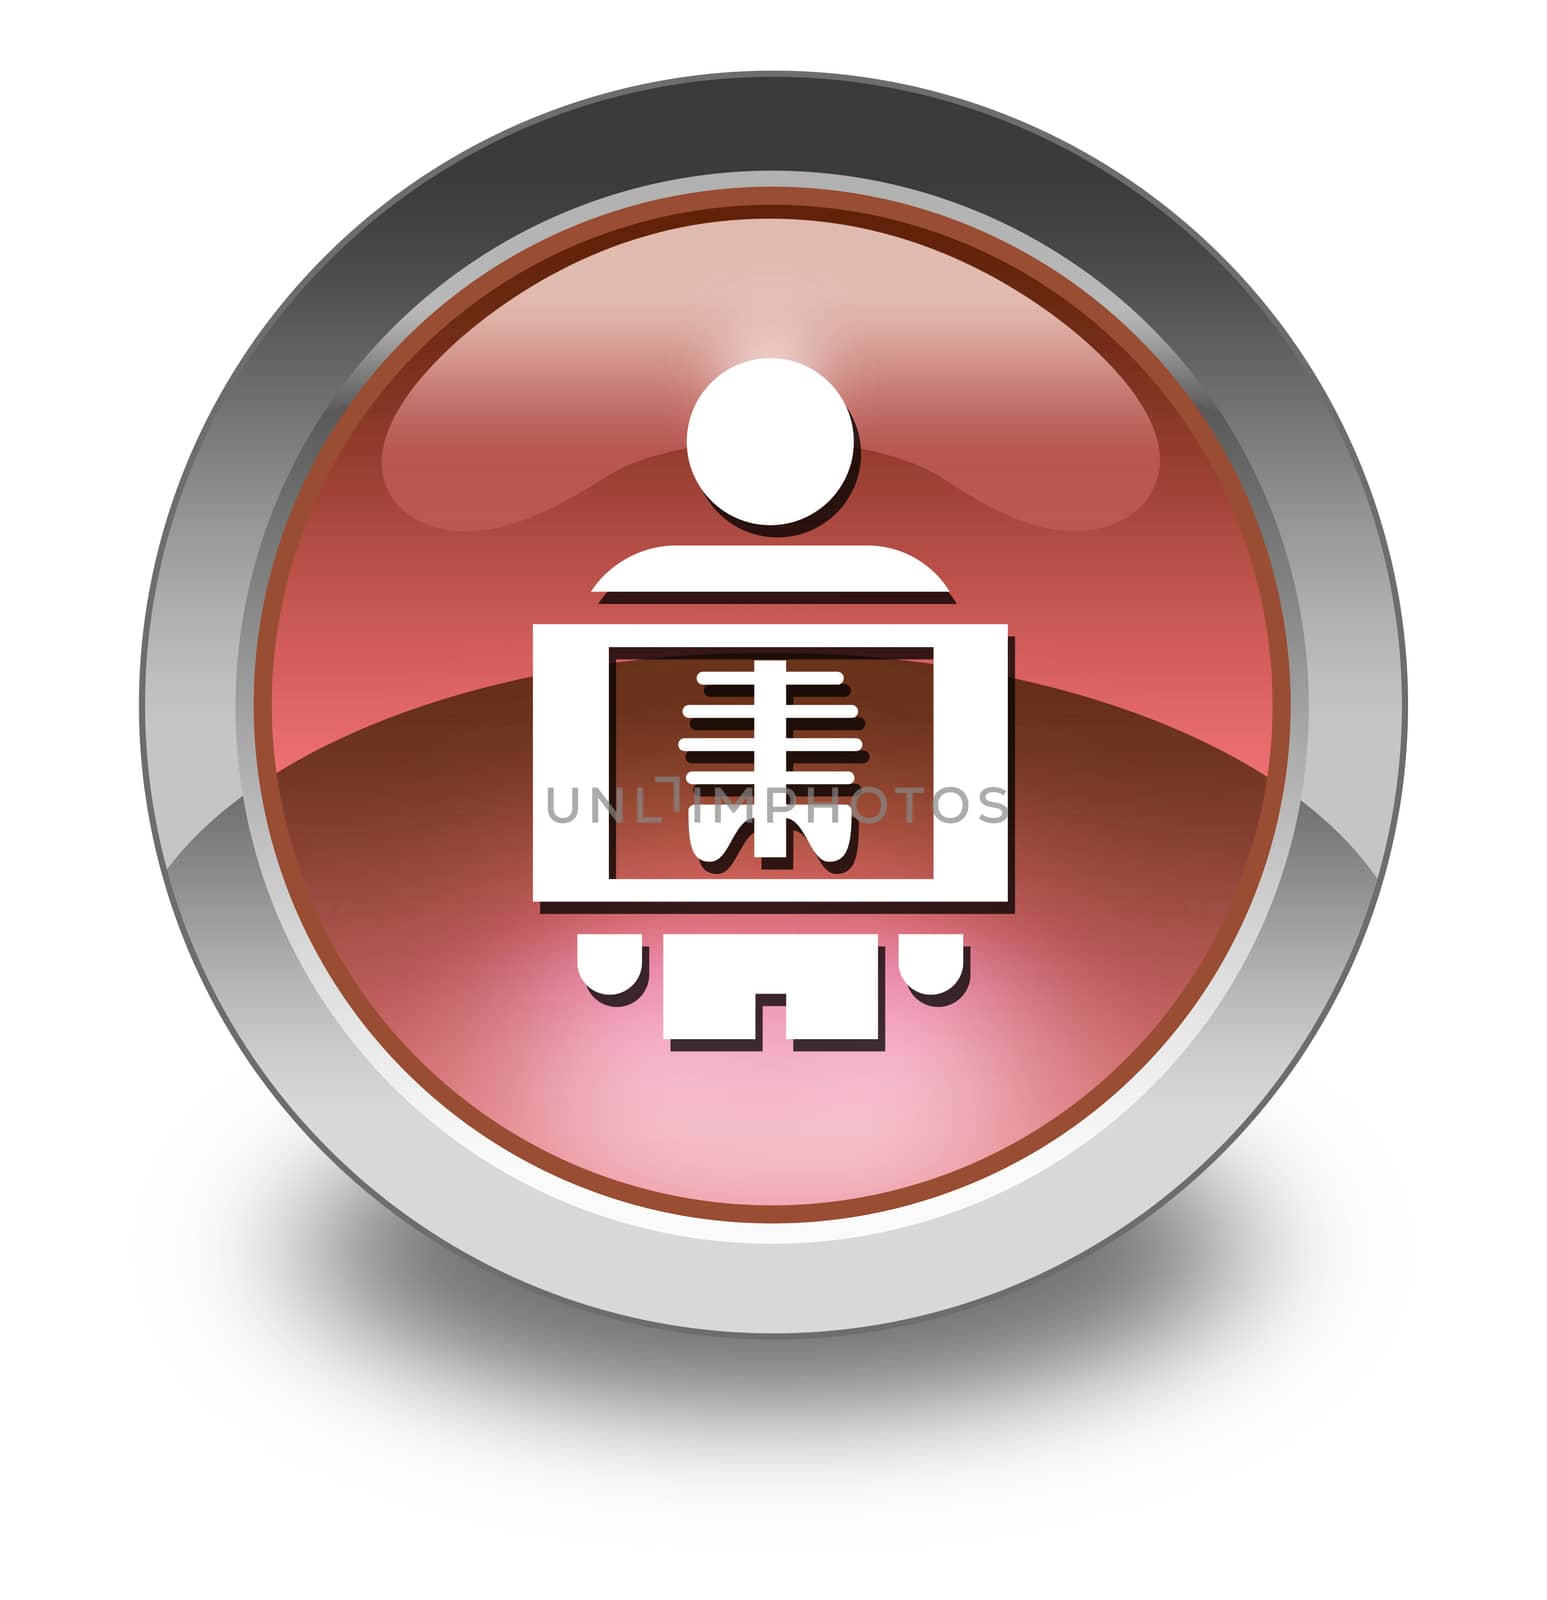 Icon, Button, Pictogram with X-Ray symbol